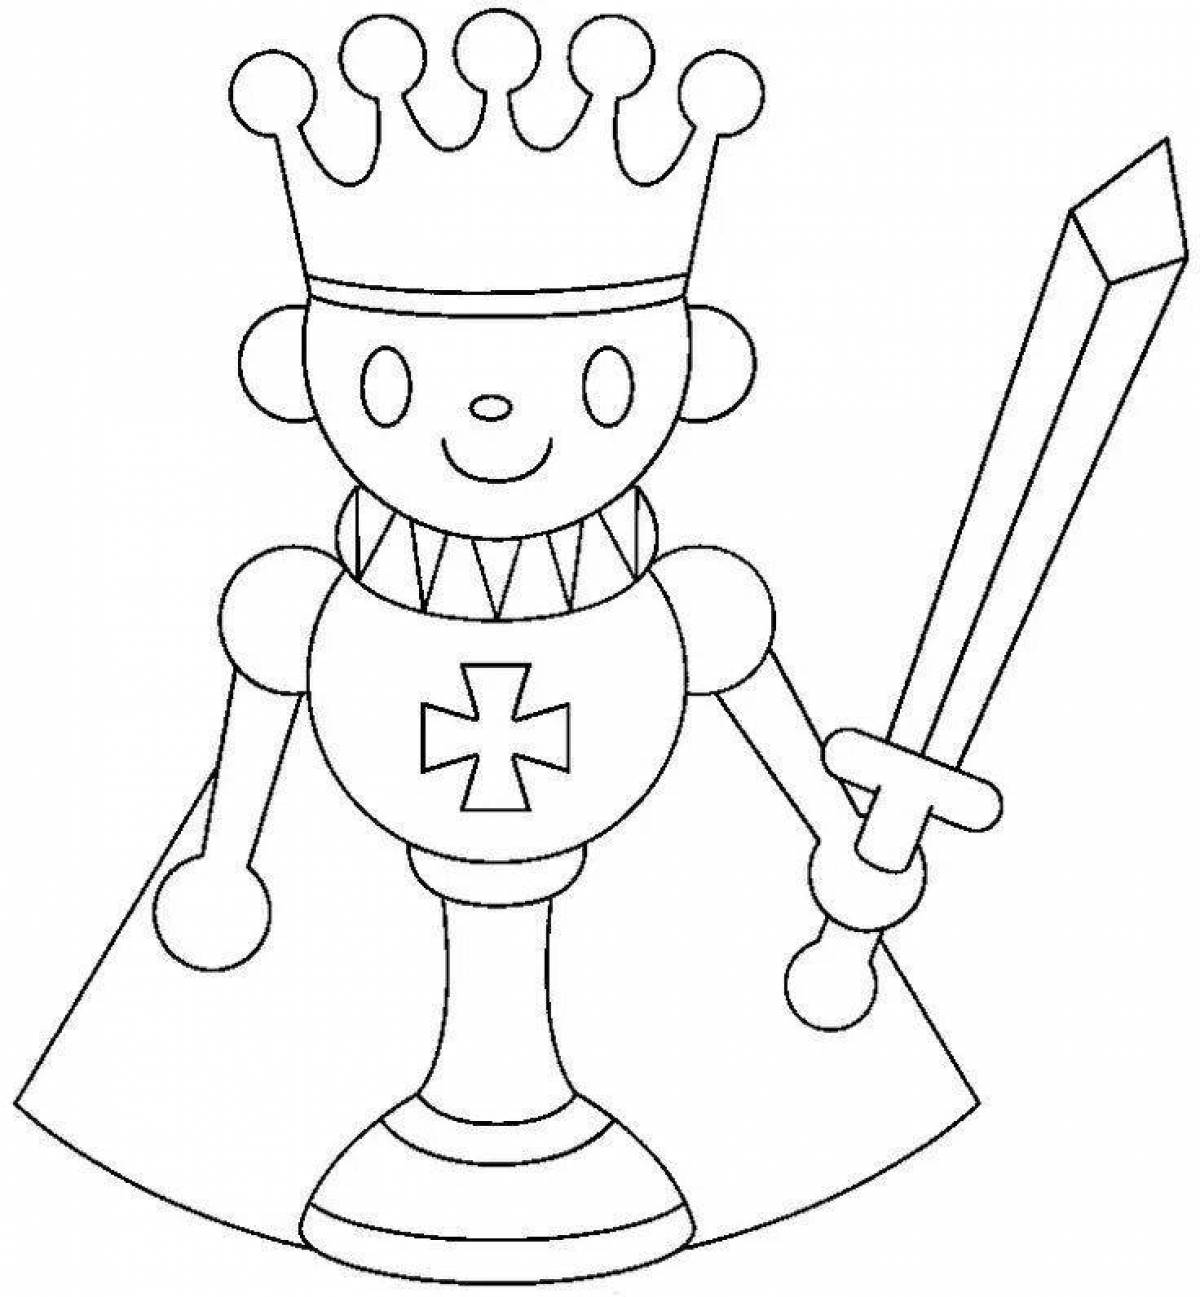 Colorful chess coloring book for preschoolers